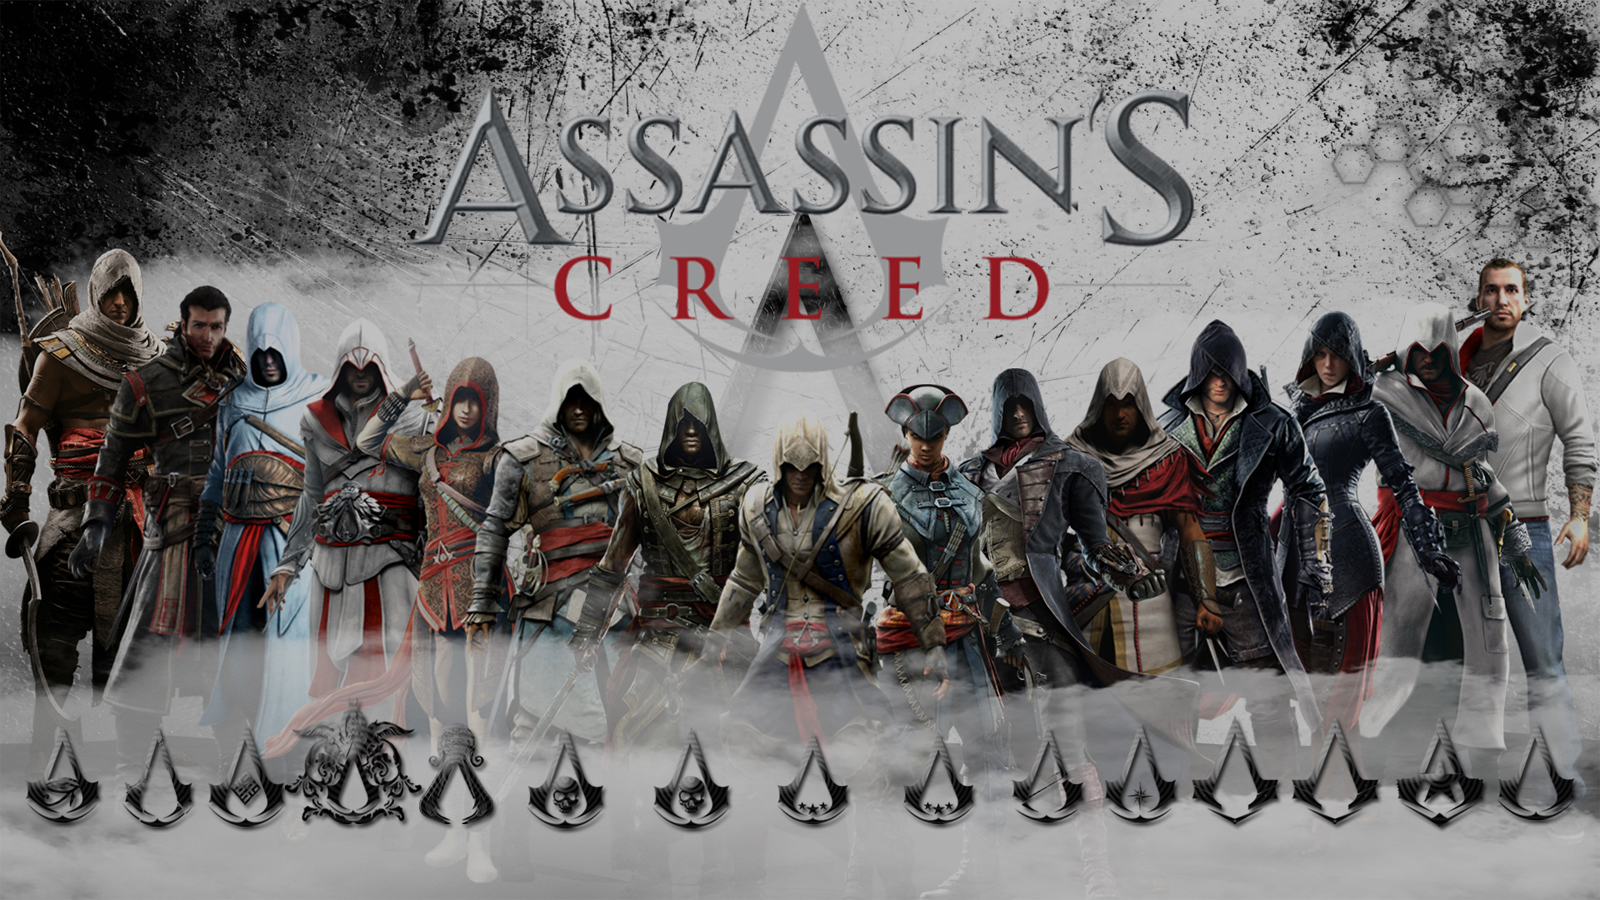 Altair Assassin 039 S Creed Assassin 039 S Creed Connor Assassin 039 S Creed Ezio Assassin 039 S Cre 1600x900